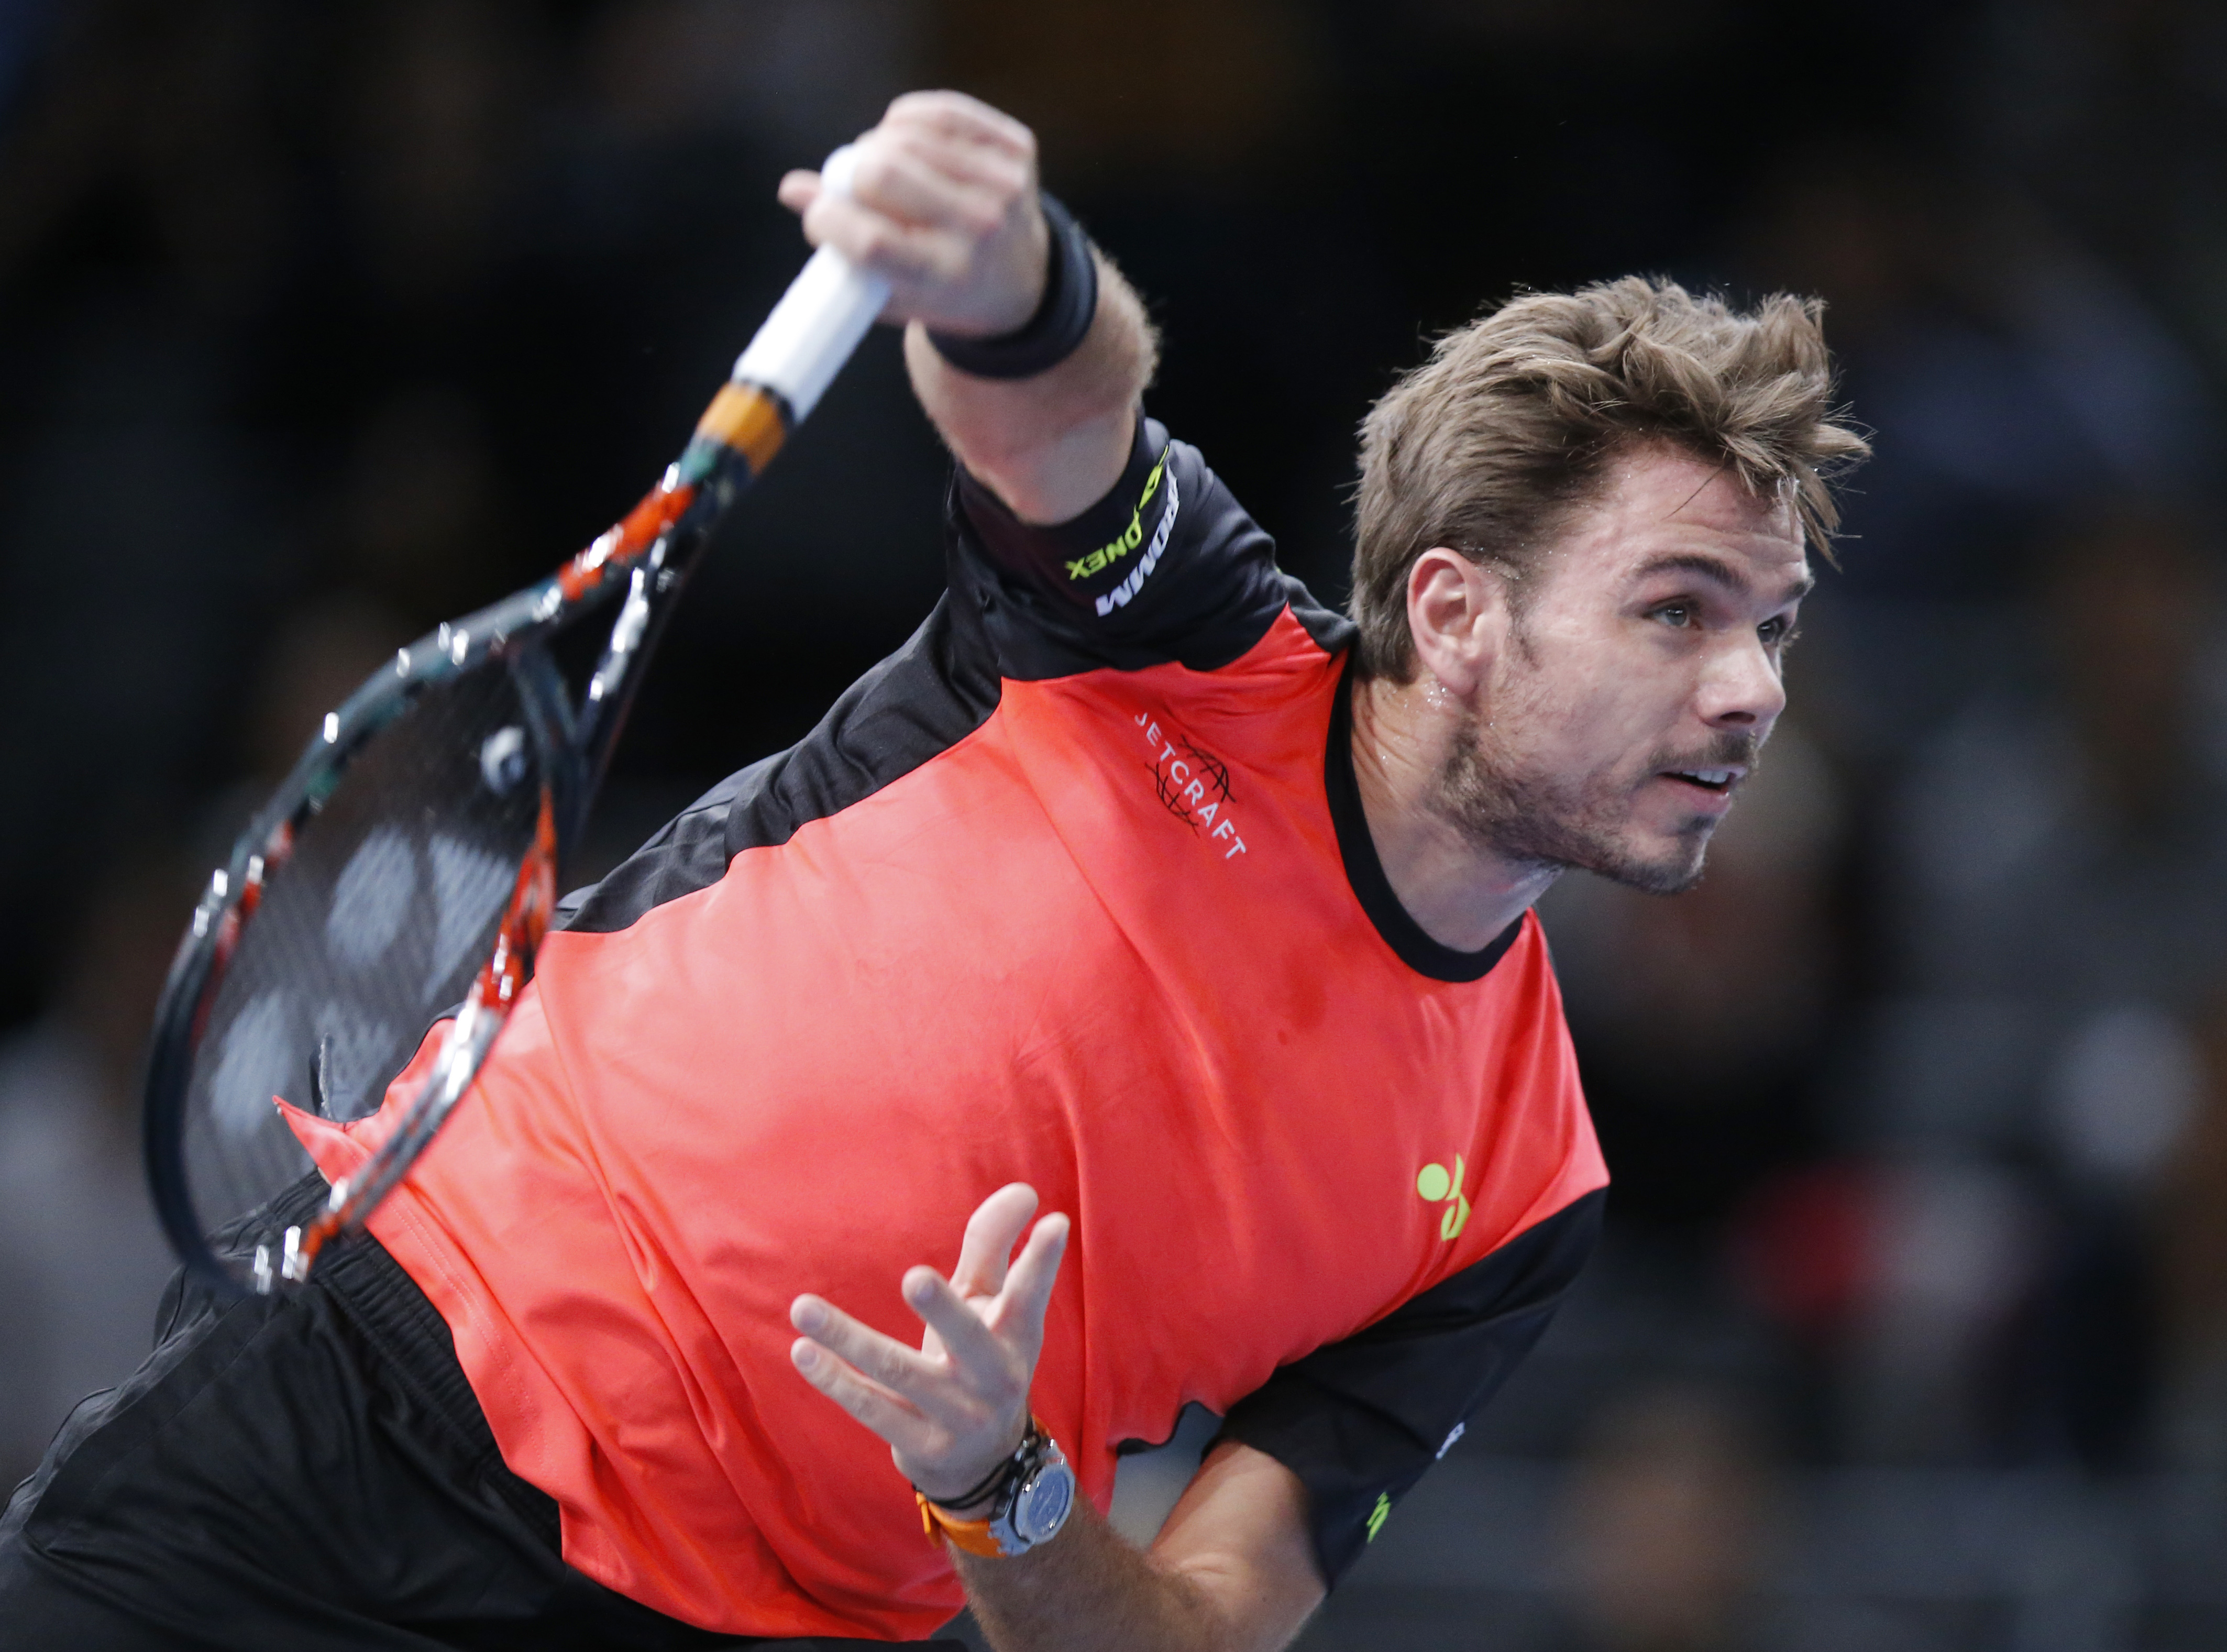 Switzerland's Stanislas Wawrinka returns the ball to Germany's Jan-Lennard Struff during the 2nd round of the Paris Masters tennis tournament at the Bercy Arena in Paris, Wednesday, Nov. 2, 2016. (AP Photo/Michel Euler)